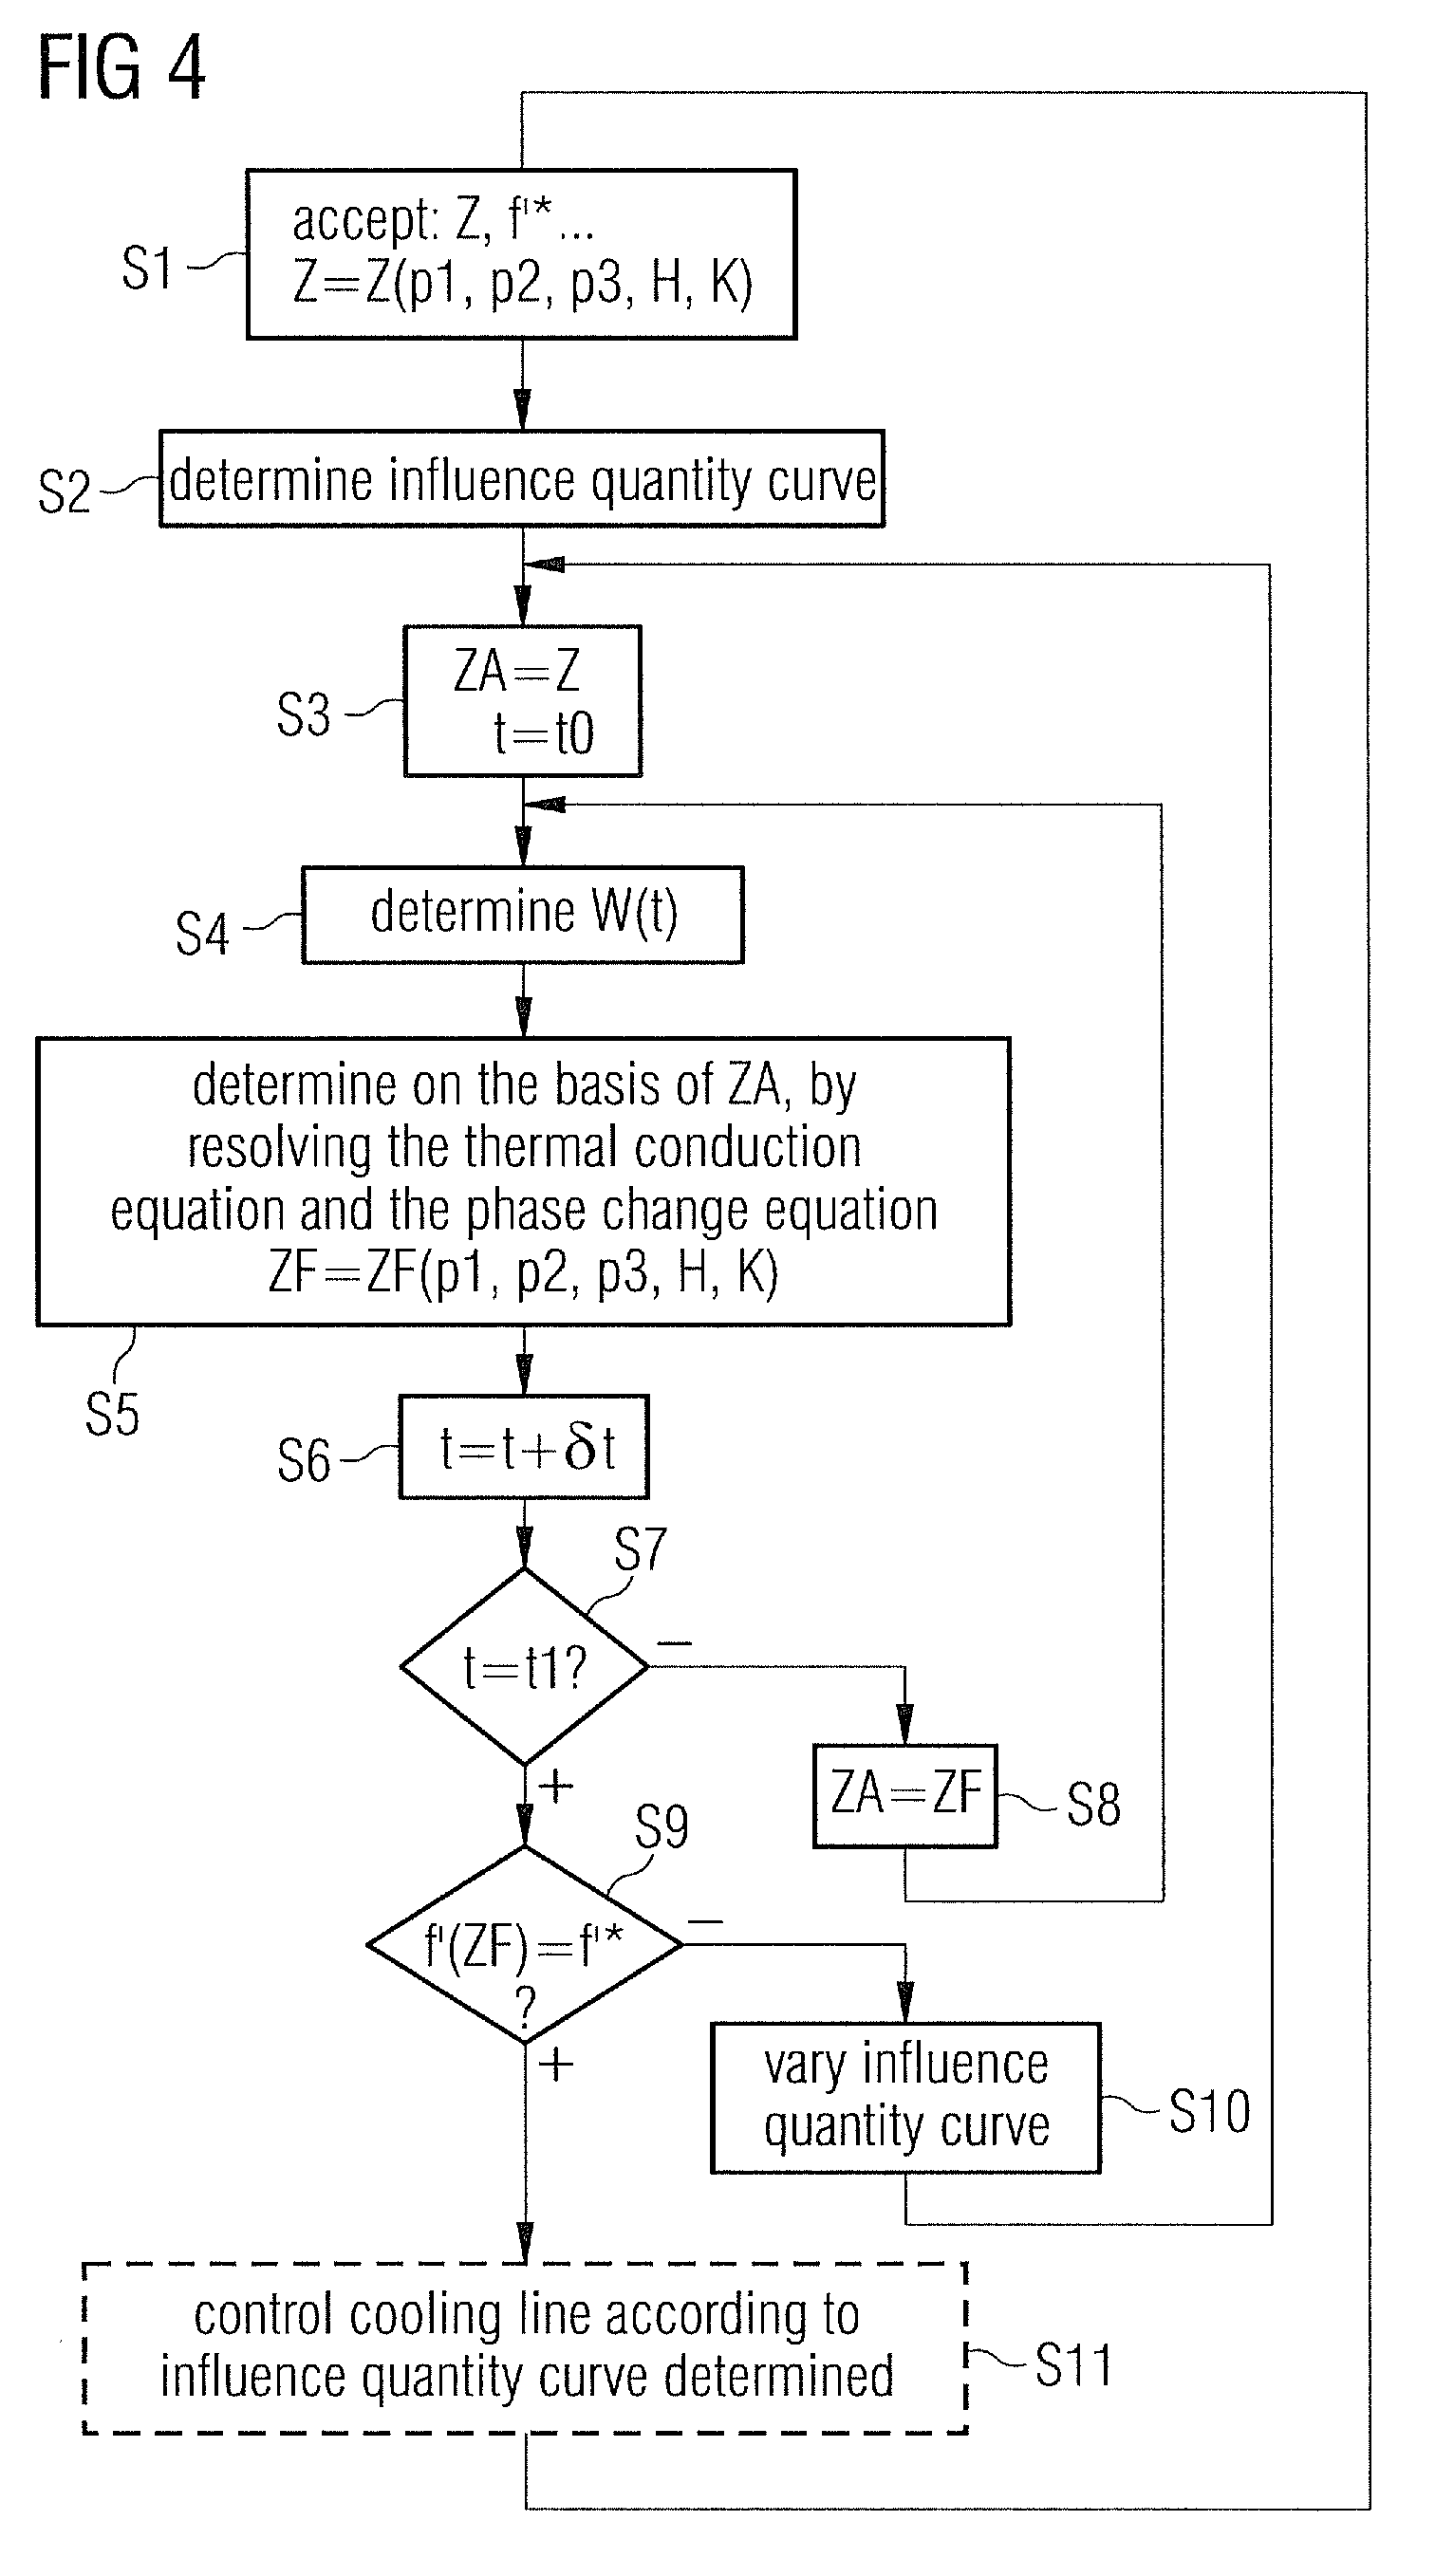 Computer-assisted modelling method for the behavior of a steel volume having a volumetric surface